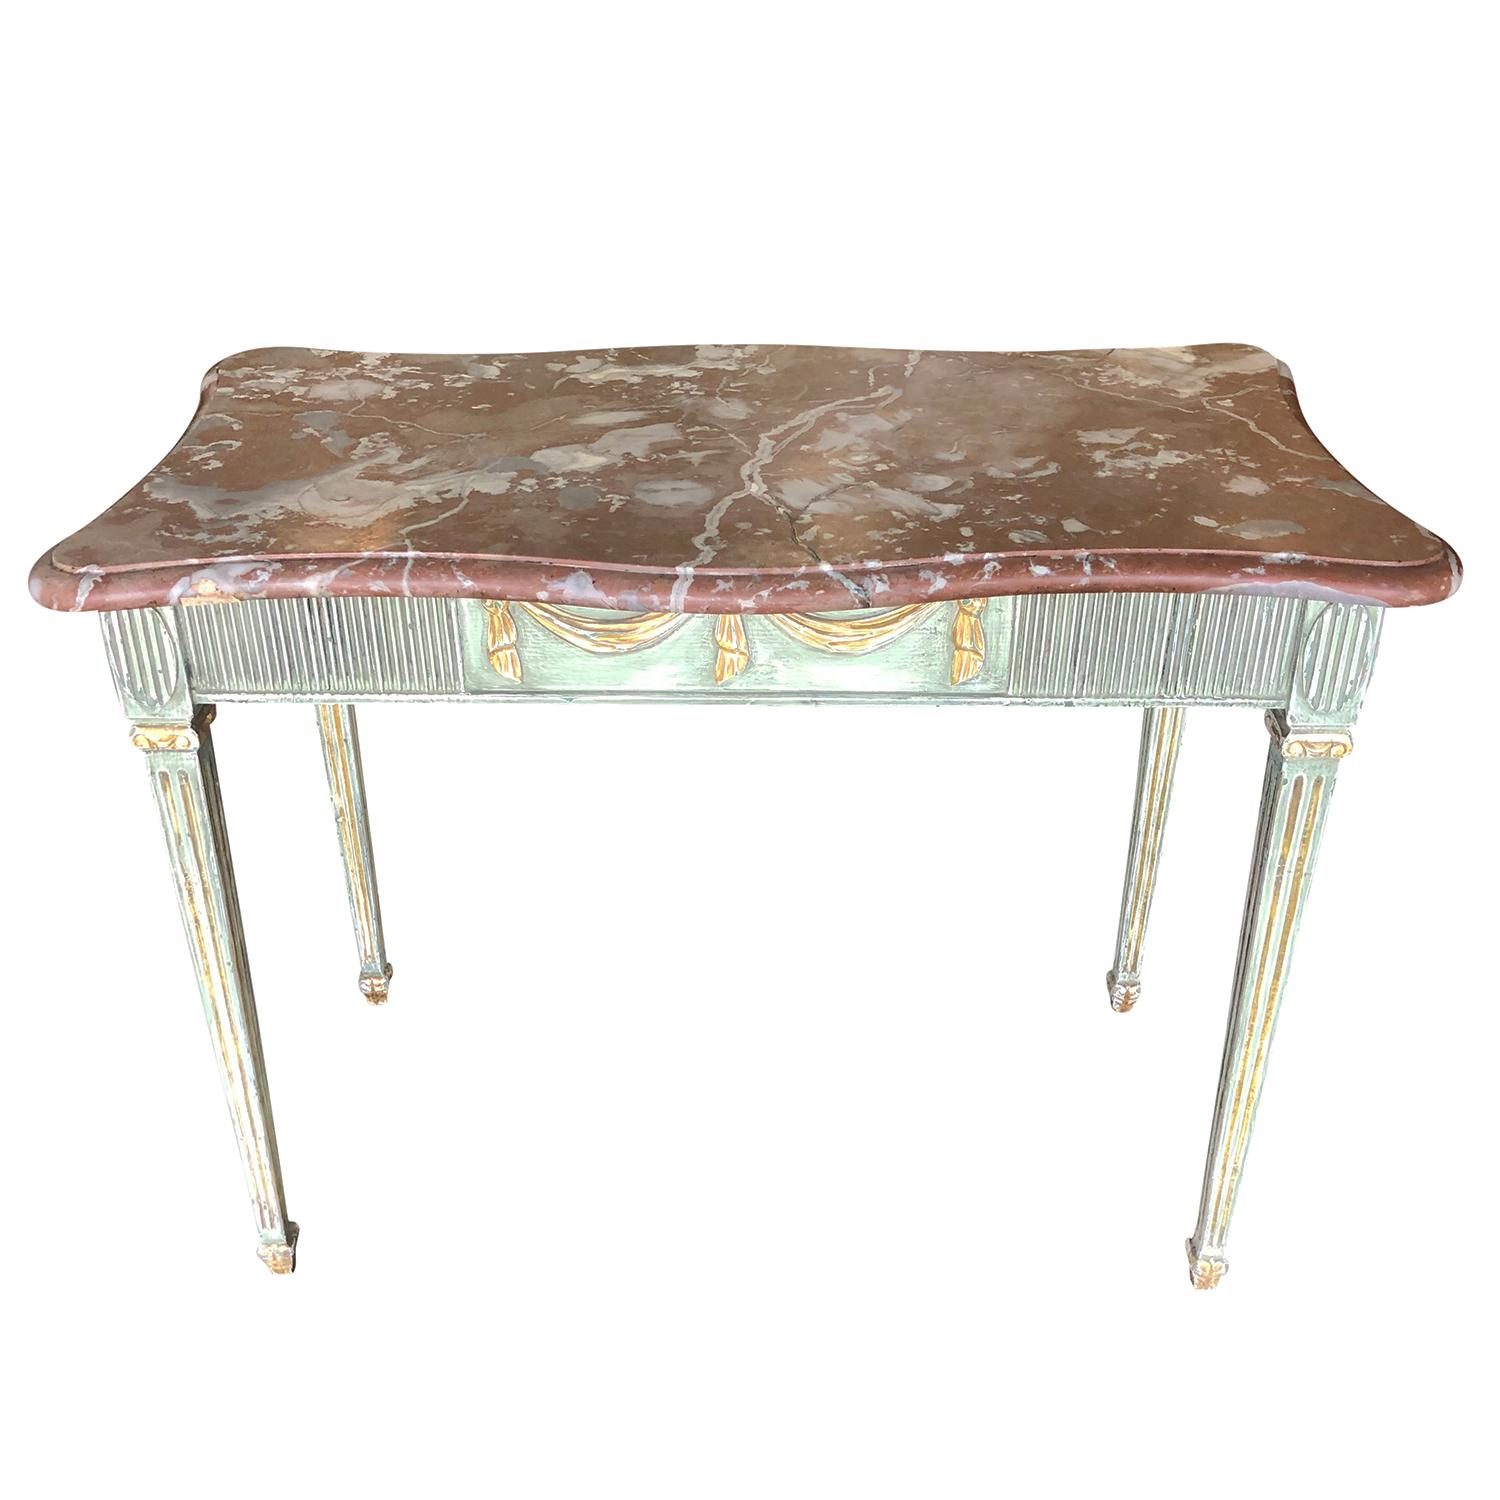 An antique Swedish Gustavian freestanding console table with a red marble top and an original green paint, gilded wood finish. The light-green, Scandinavian hand crafted table is in good condition. Wear consistent with age and use, circa 1790,